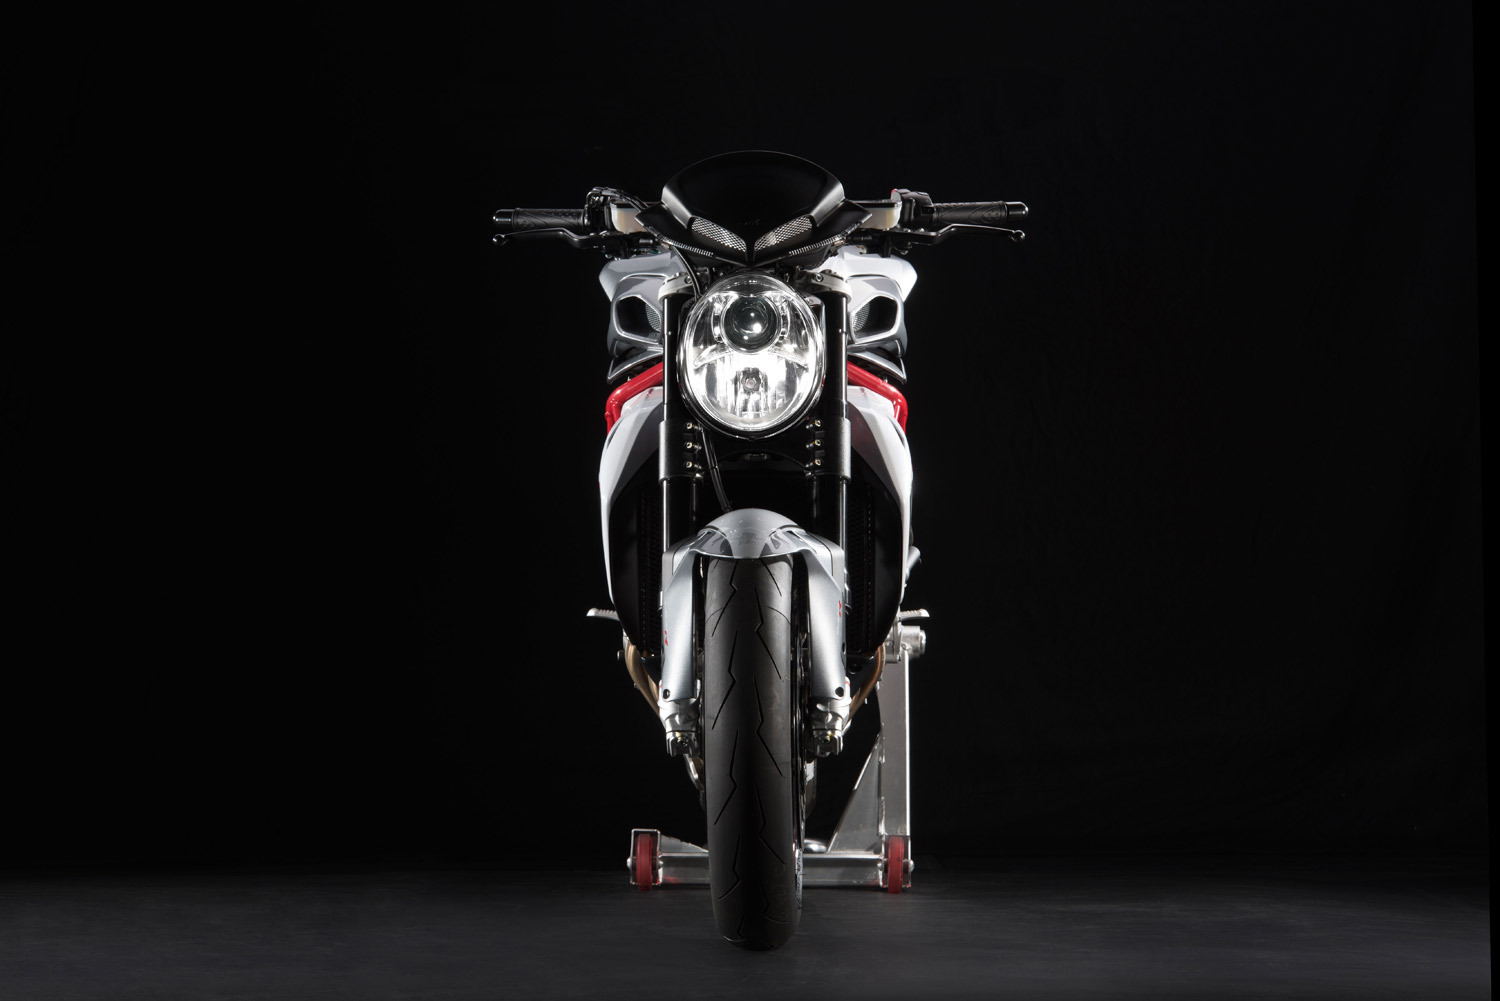 MV Agusta Brutale 1090 RR front view